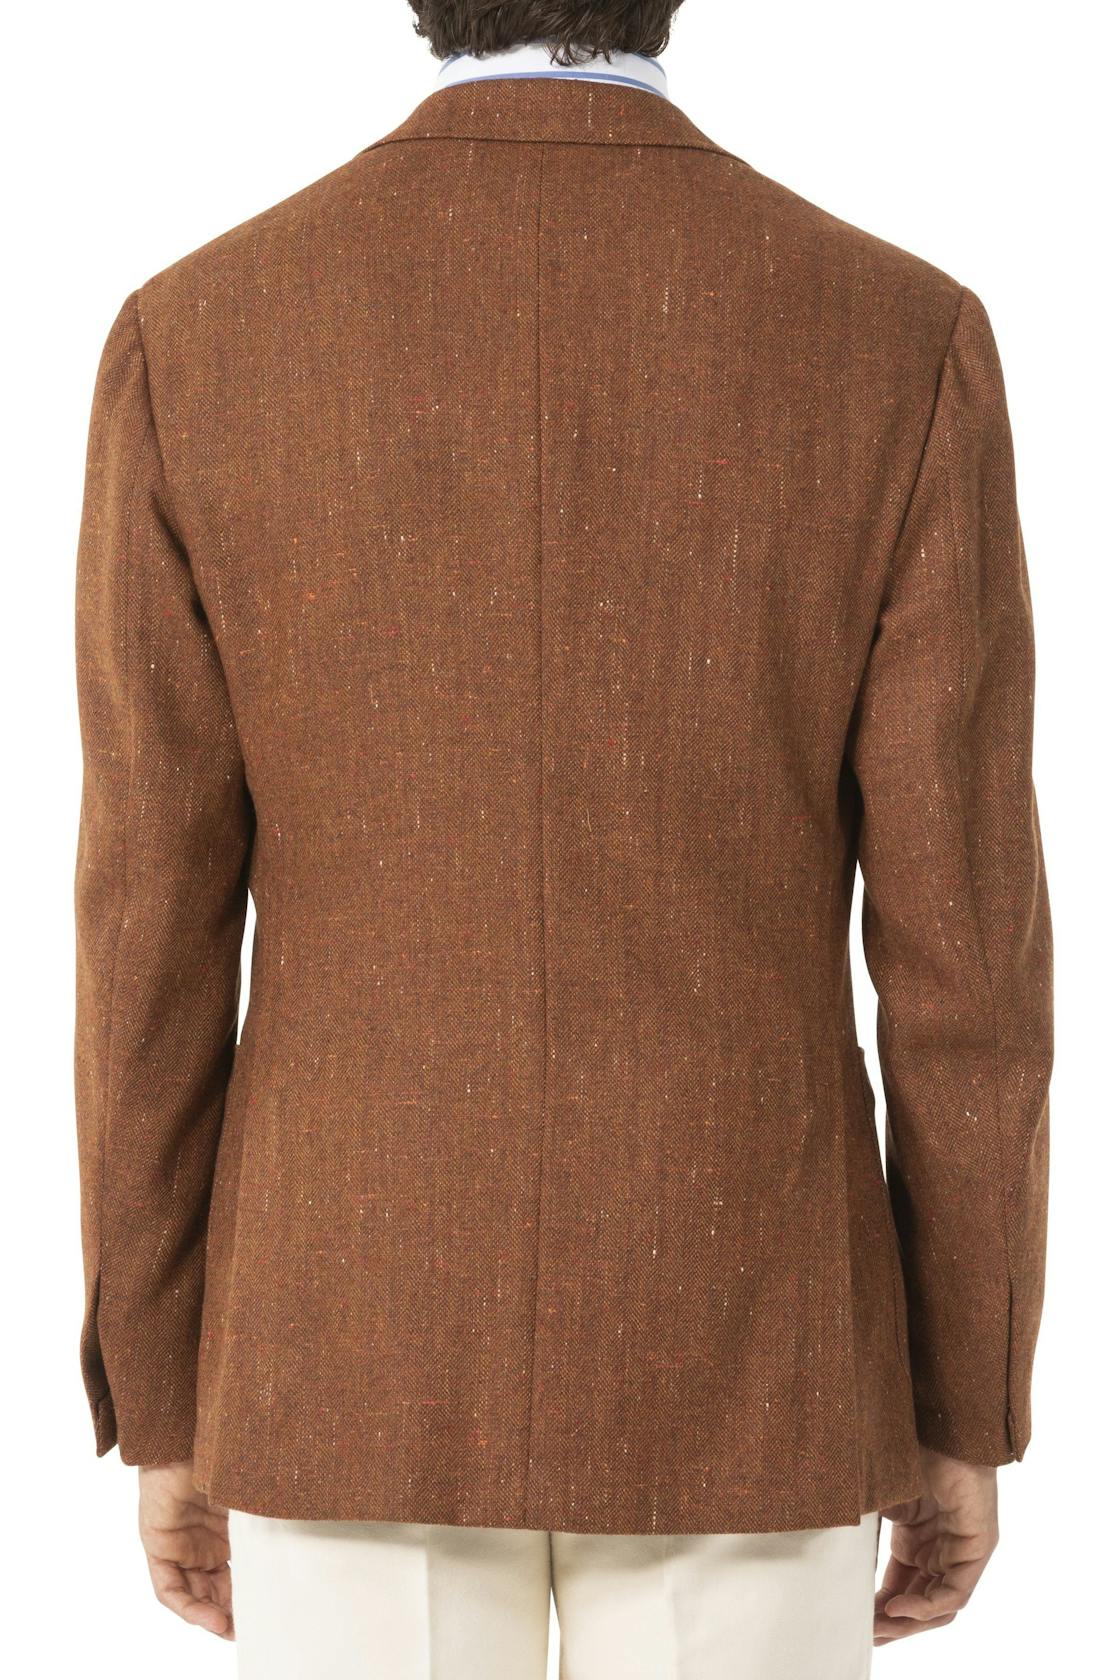 The Armoury by Ring Jacket Model 3 Terracotta Wool-Silk-Cashmere Sport Coat